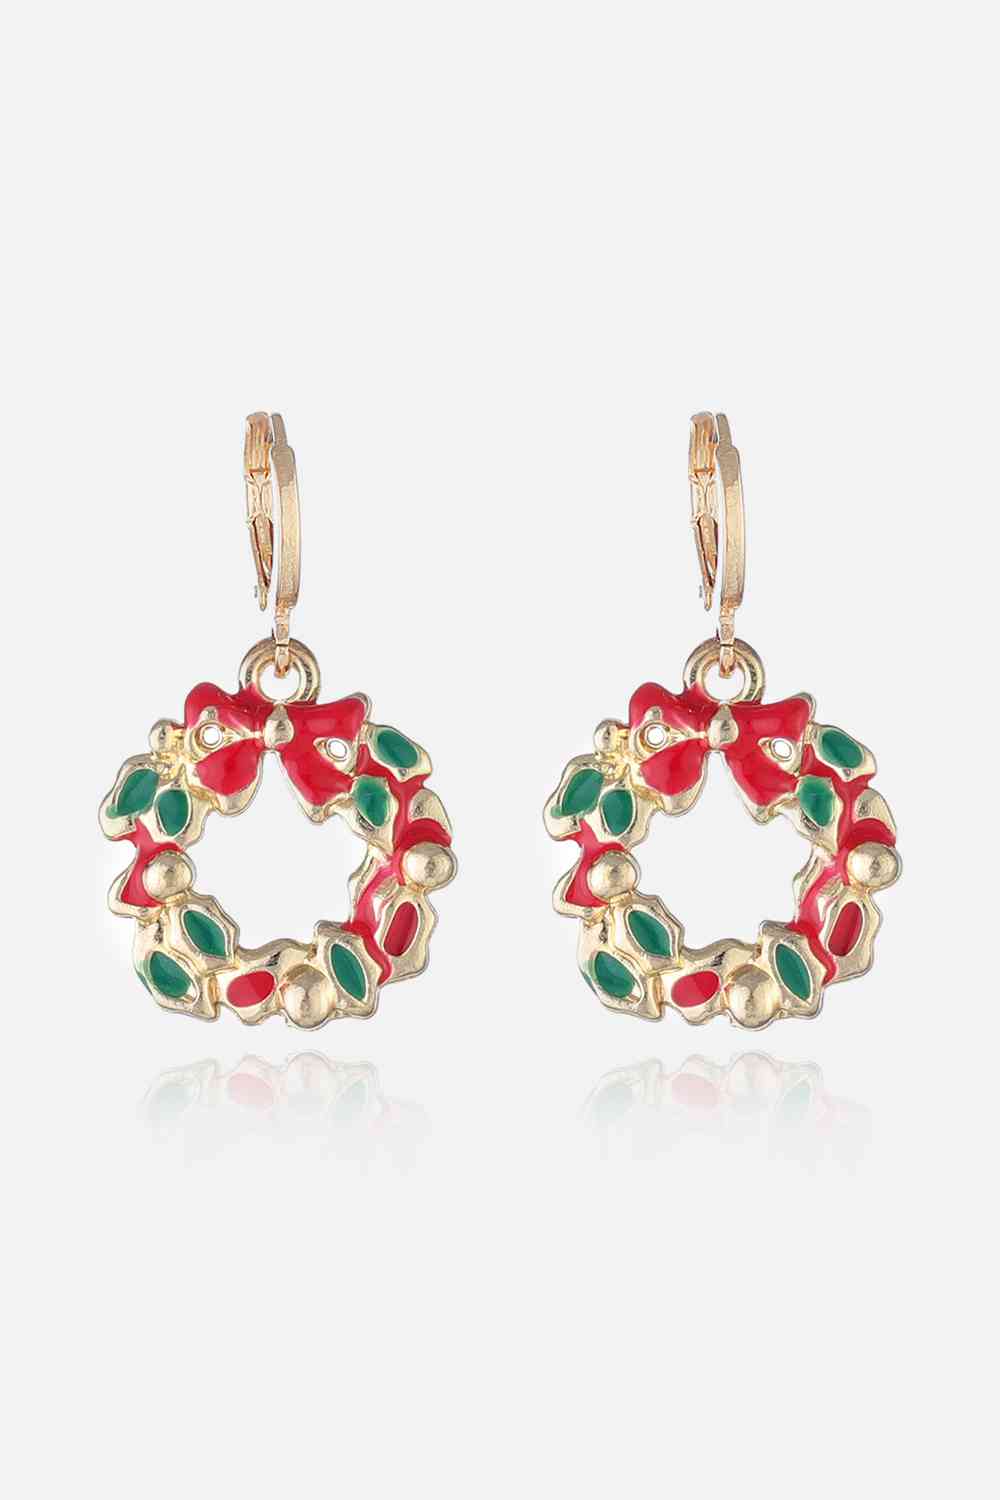 Christmas Alloy Earrings for Women Style C One Size